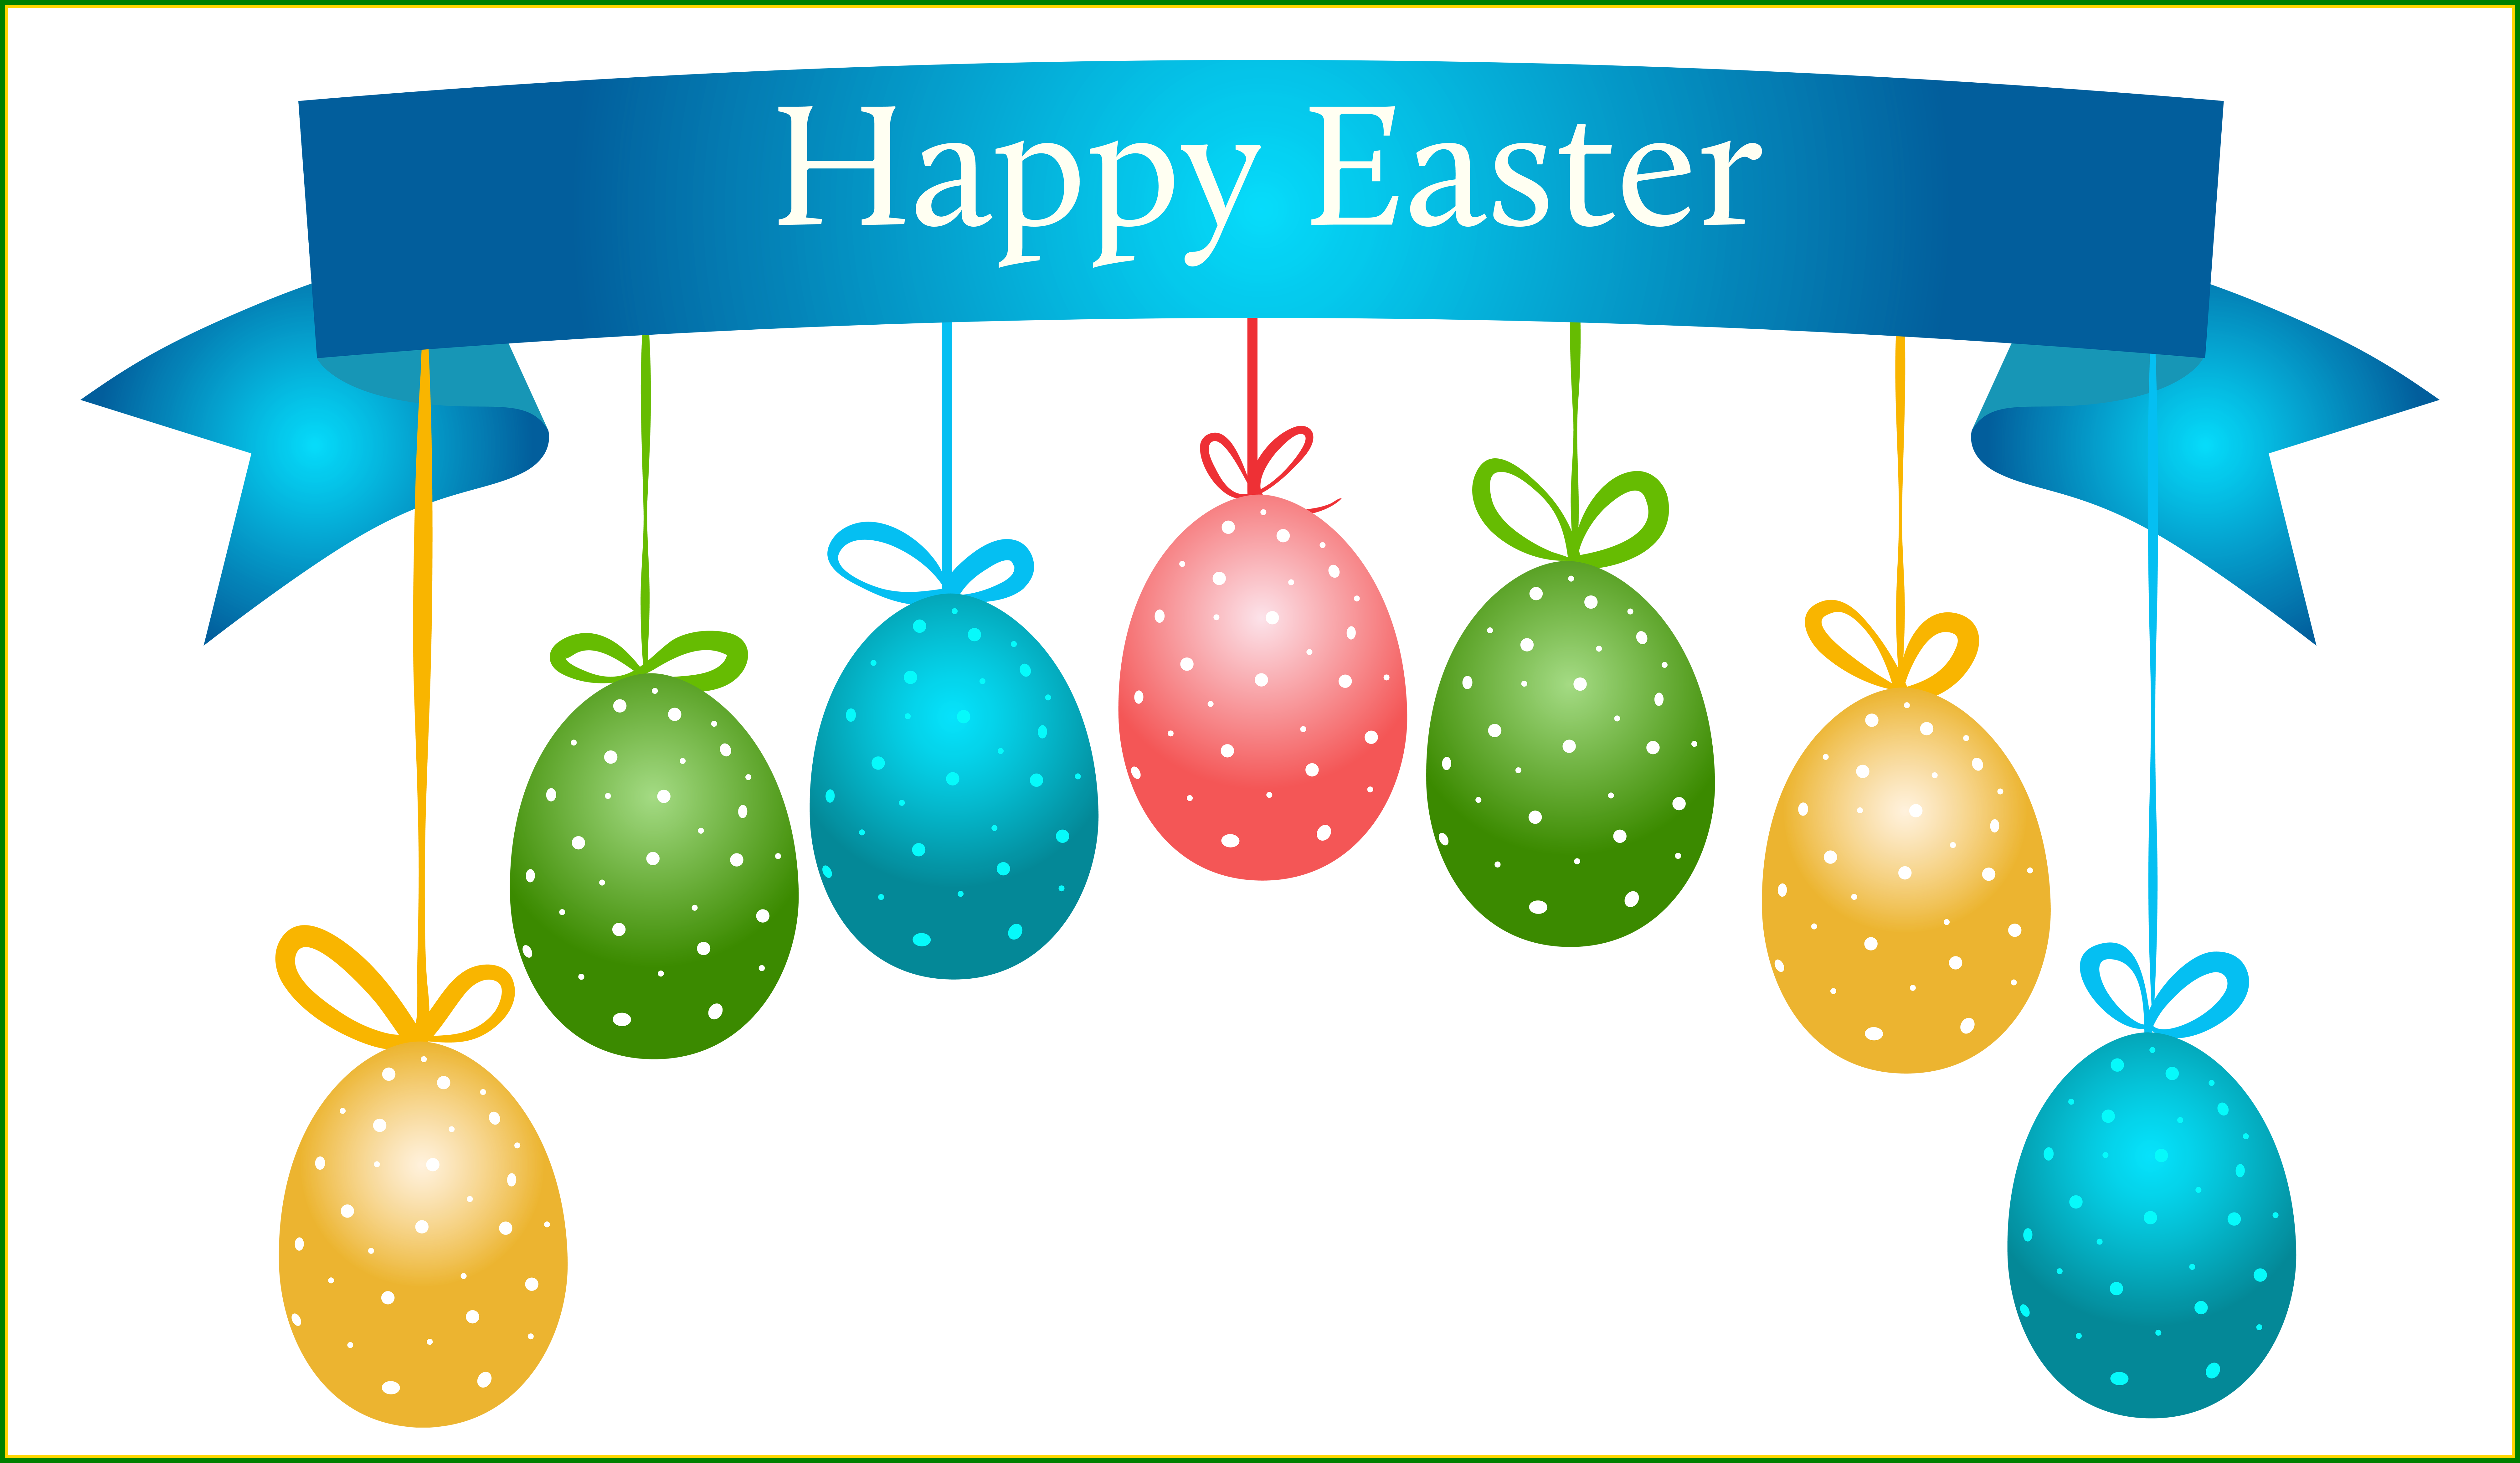 Astonishing happy banner with. Easter clipart butterfly